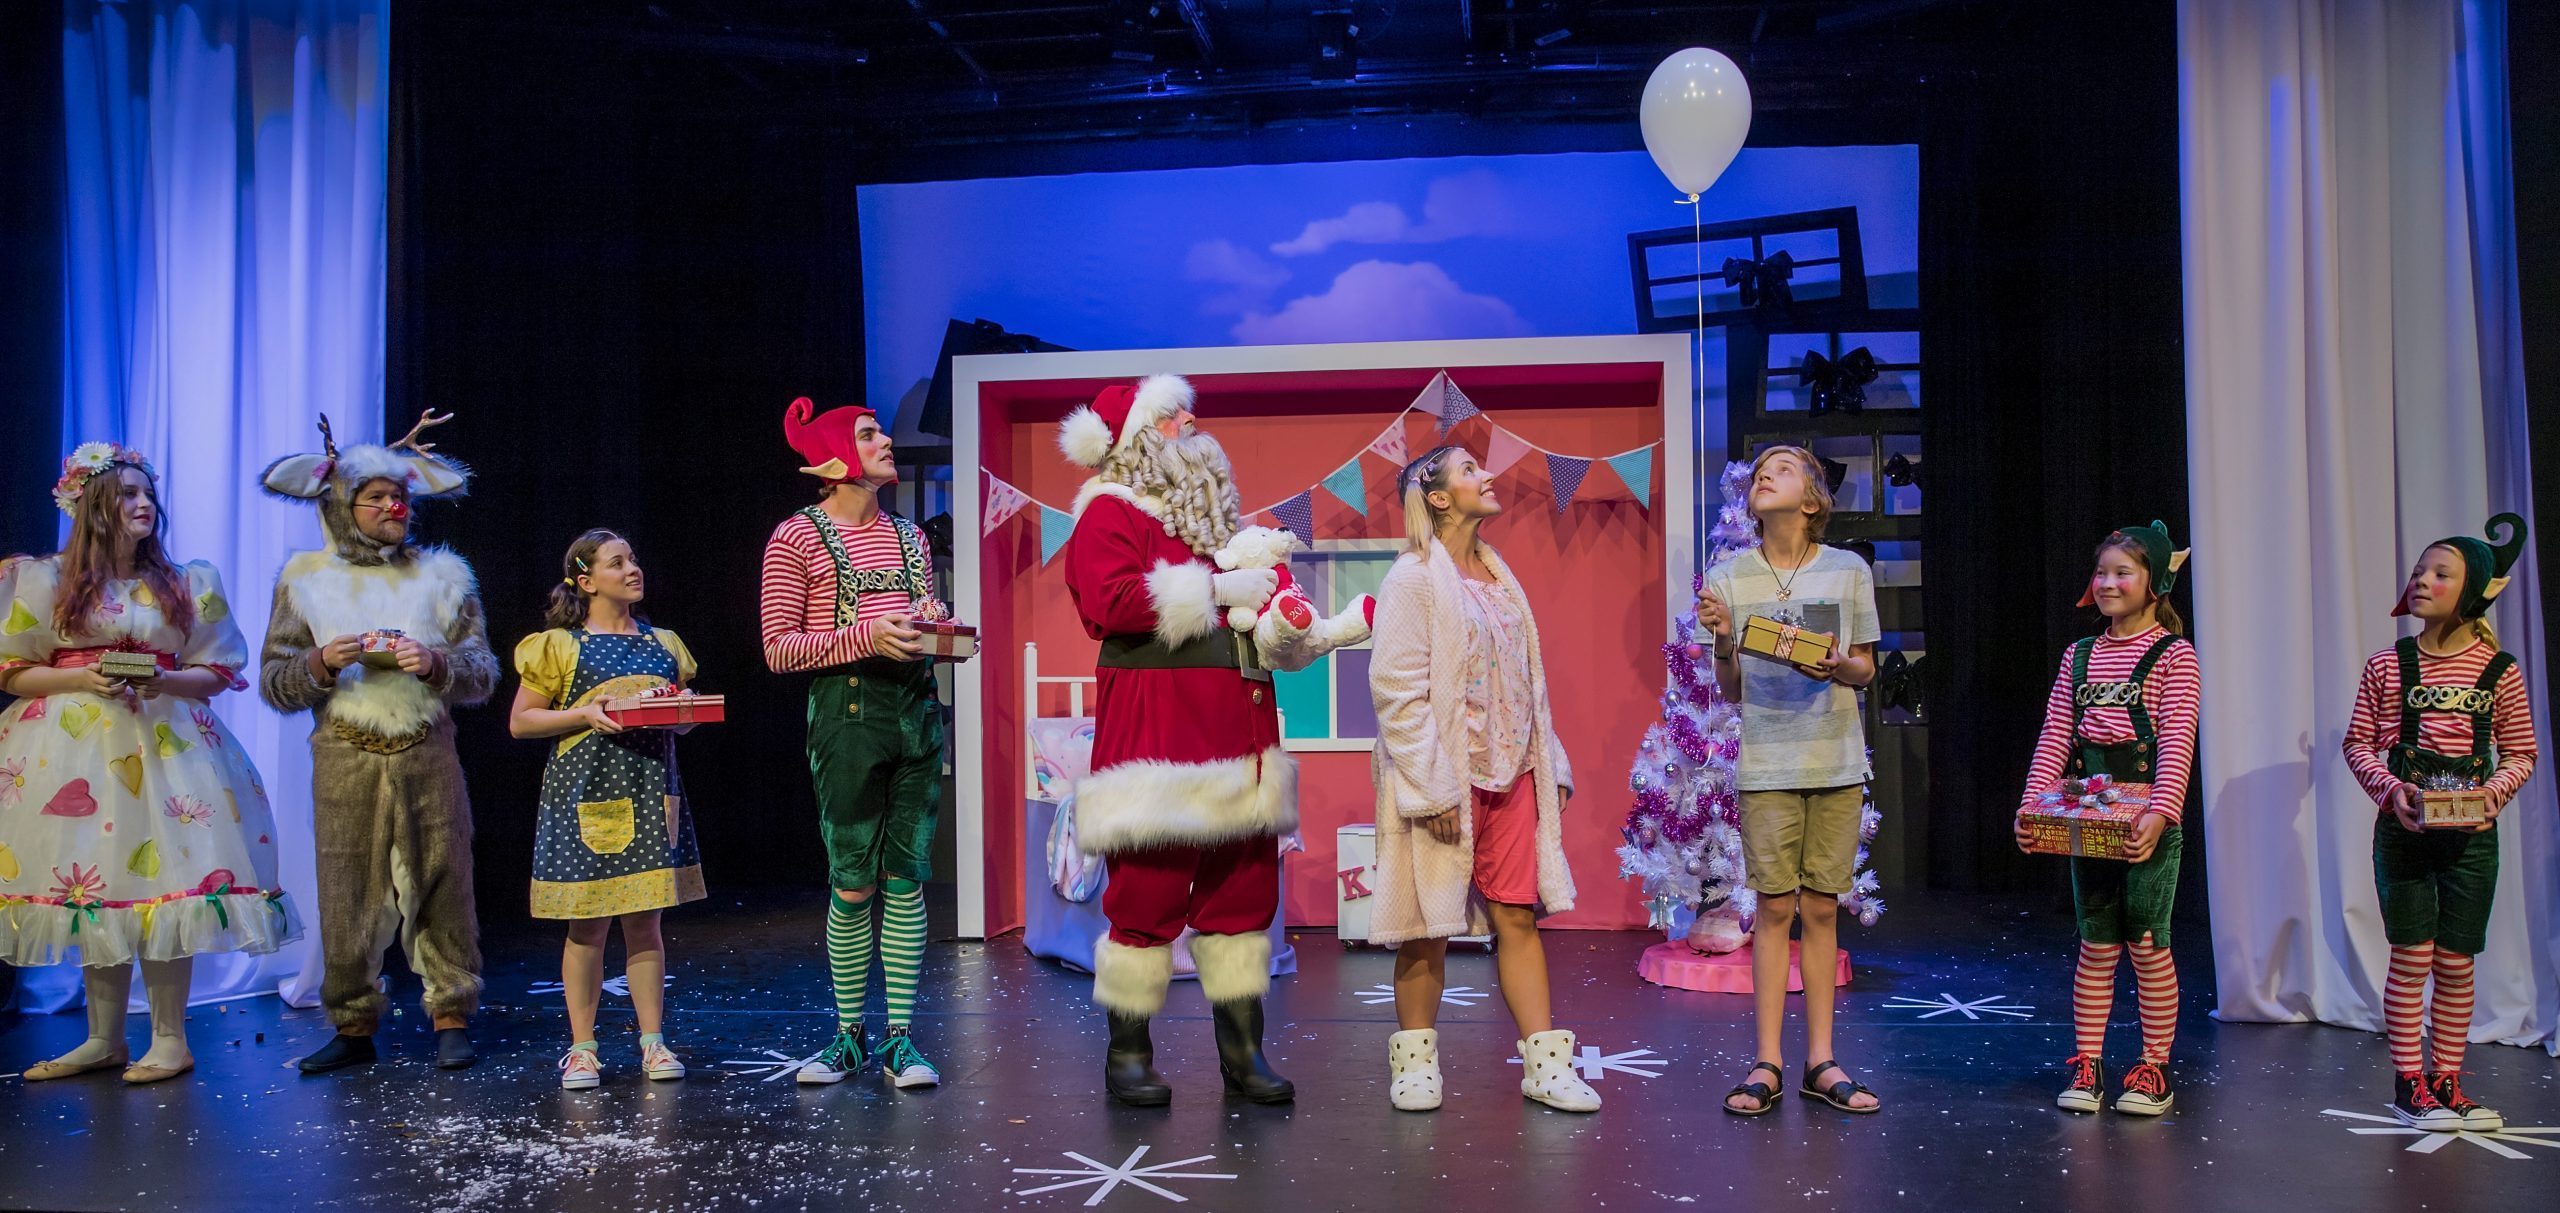 A line of all the Christmas show characters across the front of the stage, gazing up at a white balloon held by a young boy. Behind them is Kelly's pink bedroom.